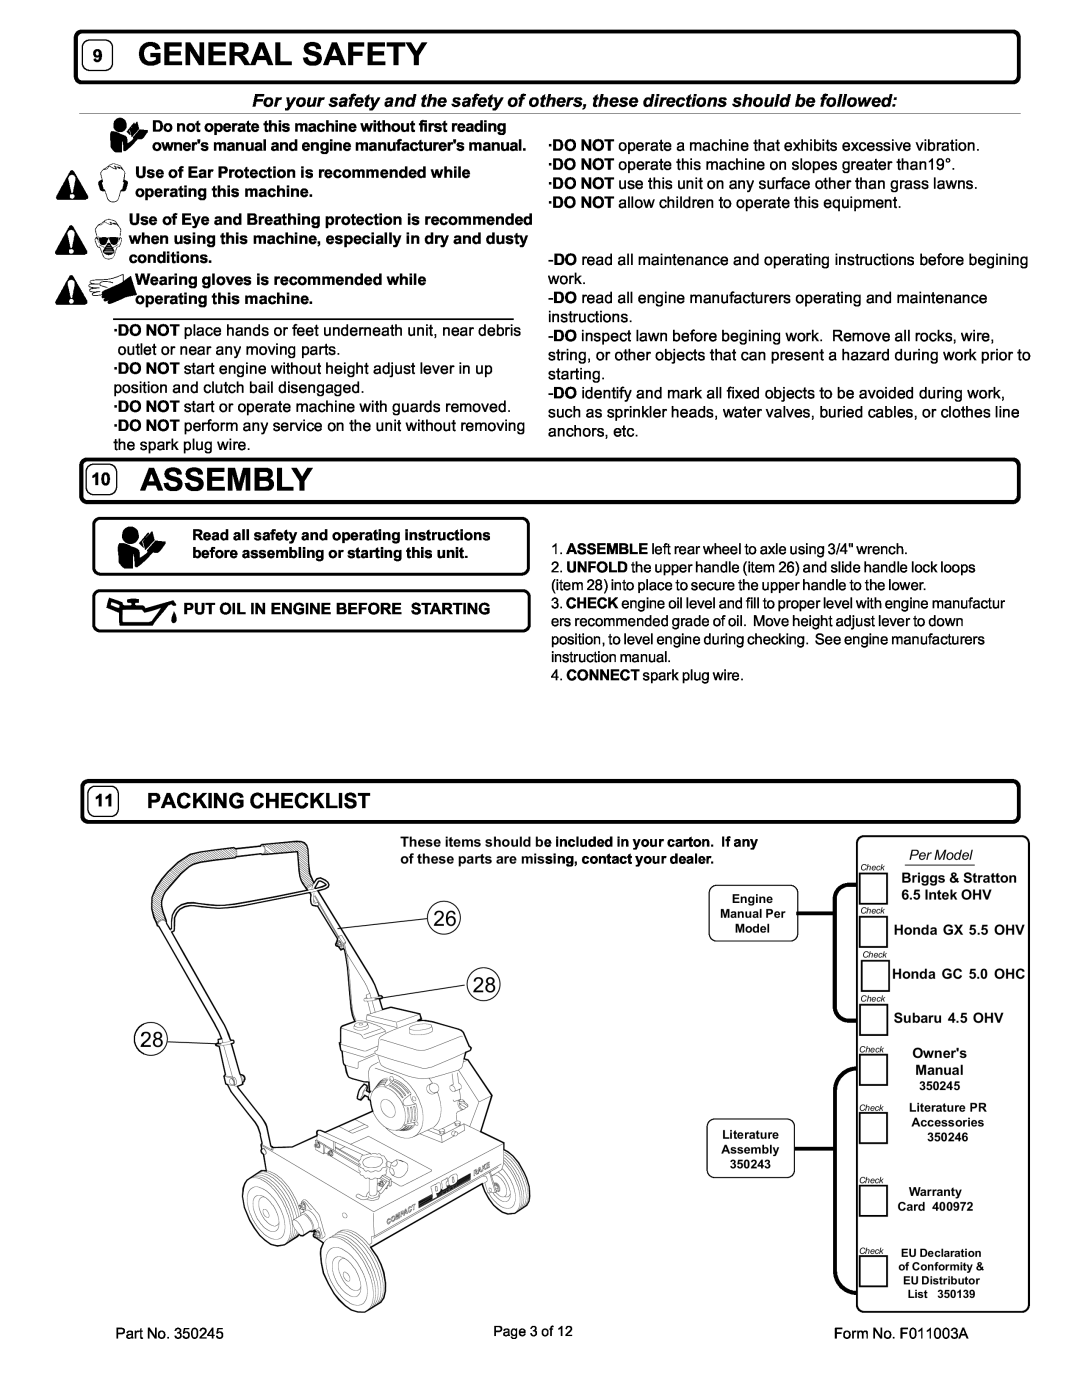 Billy Goat CR450S, CR550, CR550HC, CR550H owner manual General Safety, Assembly, Packing Checklist 